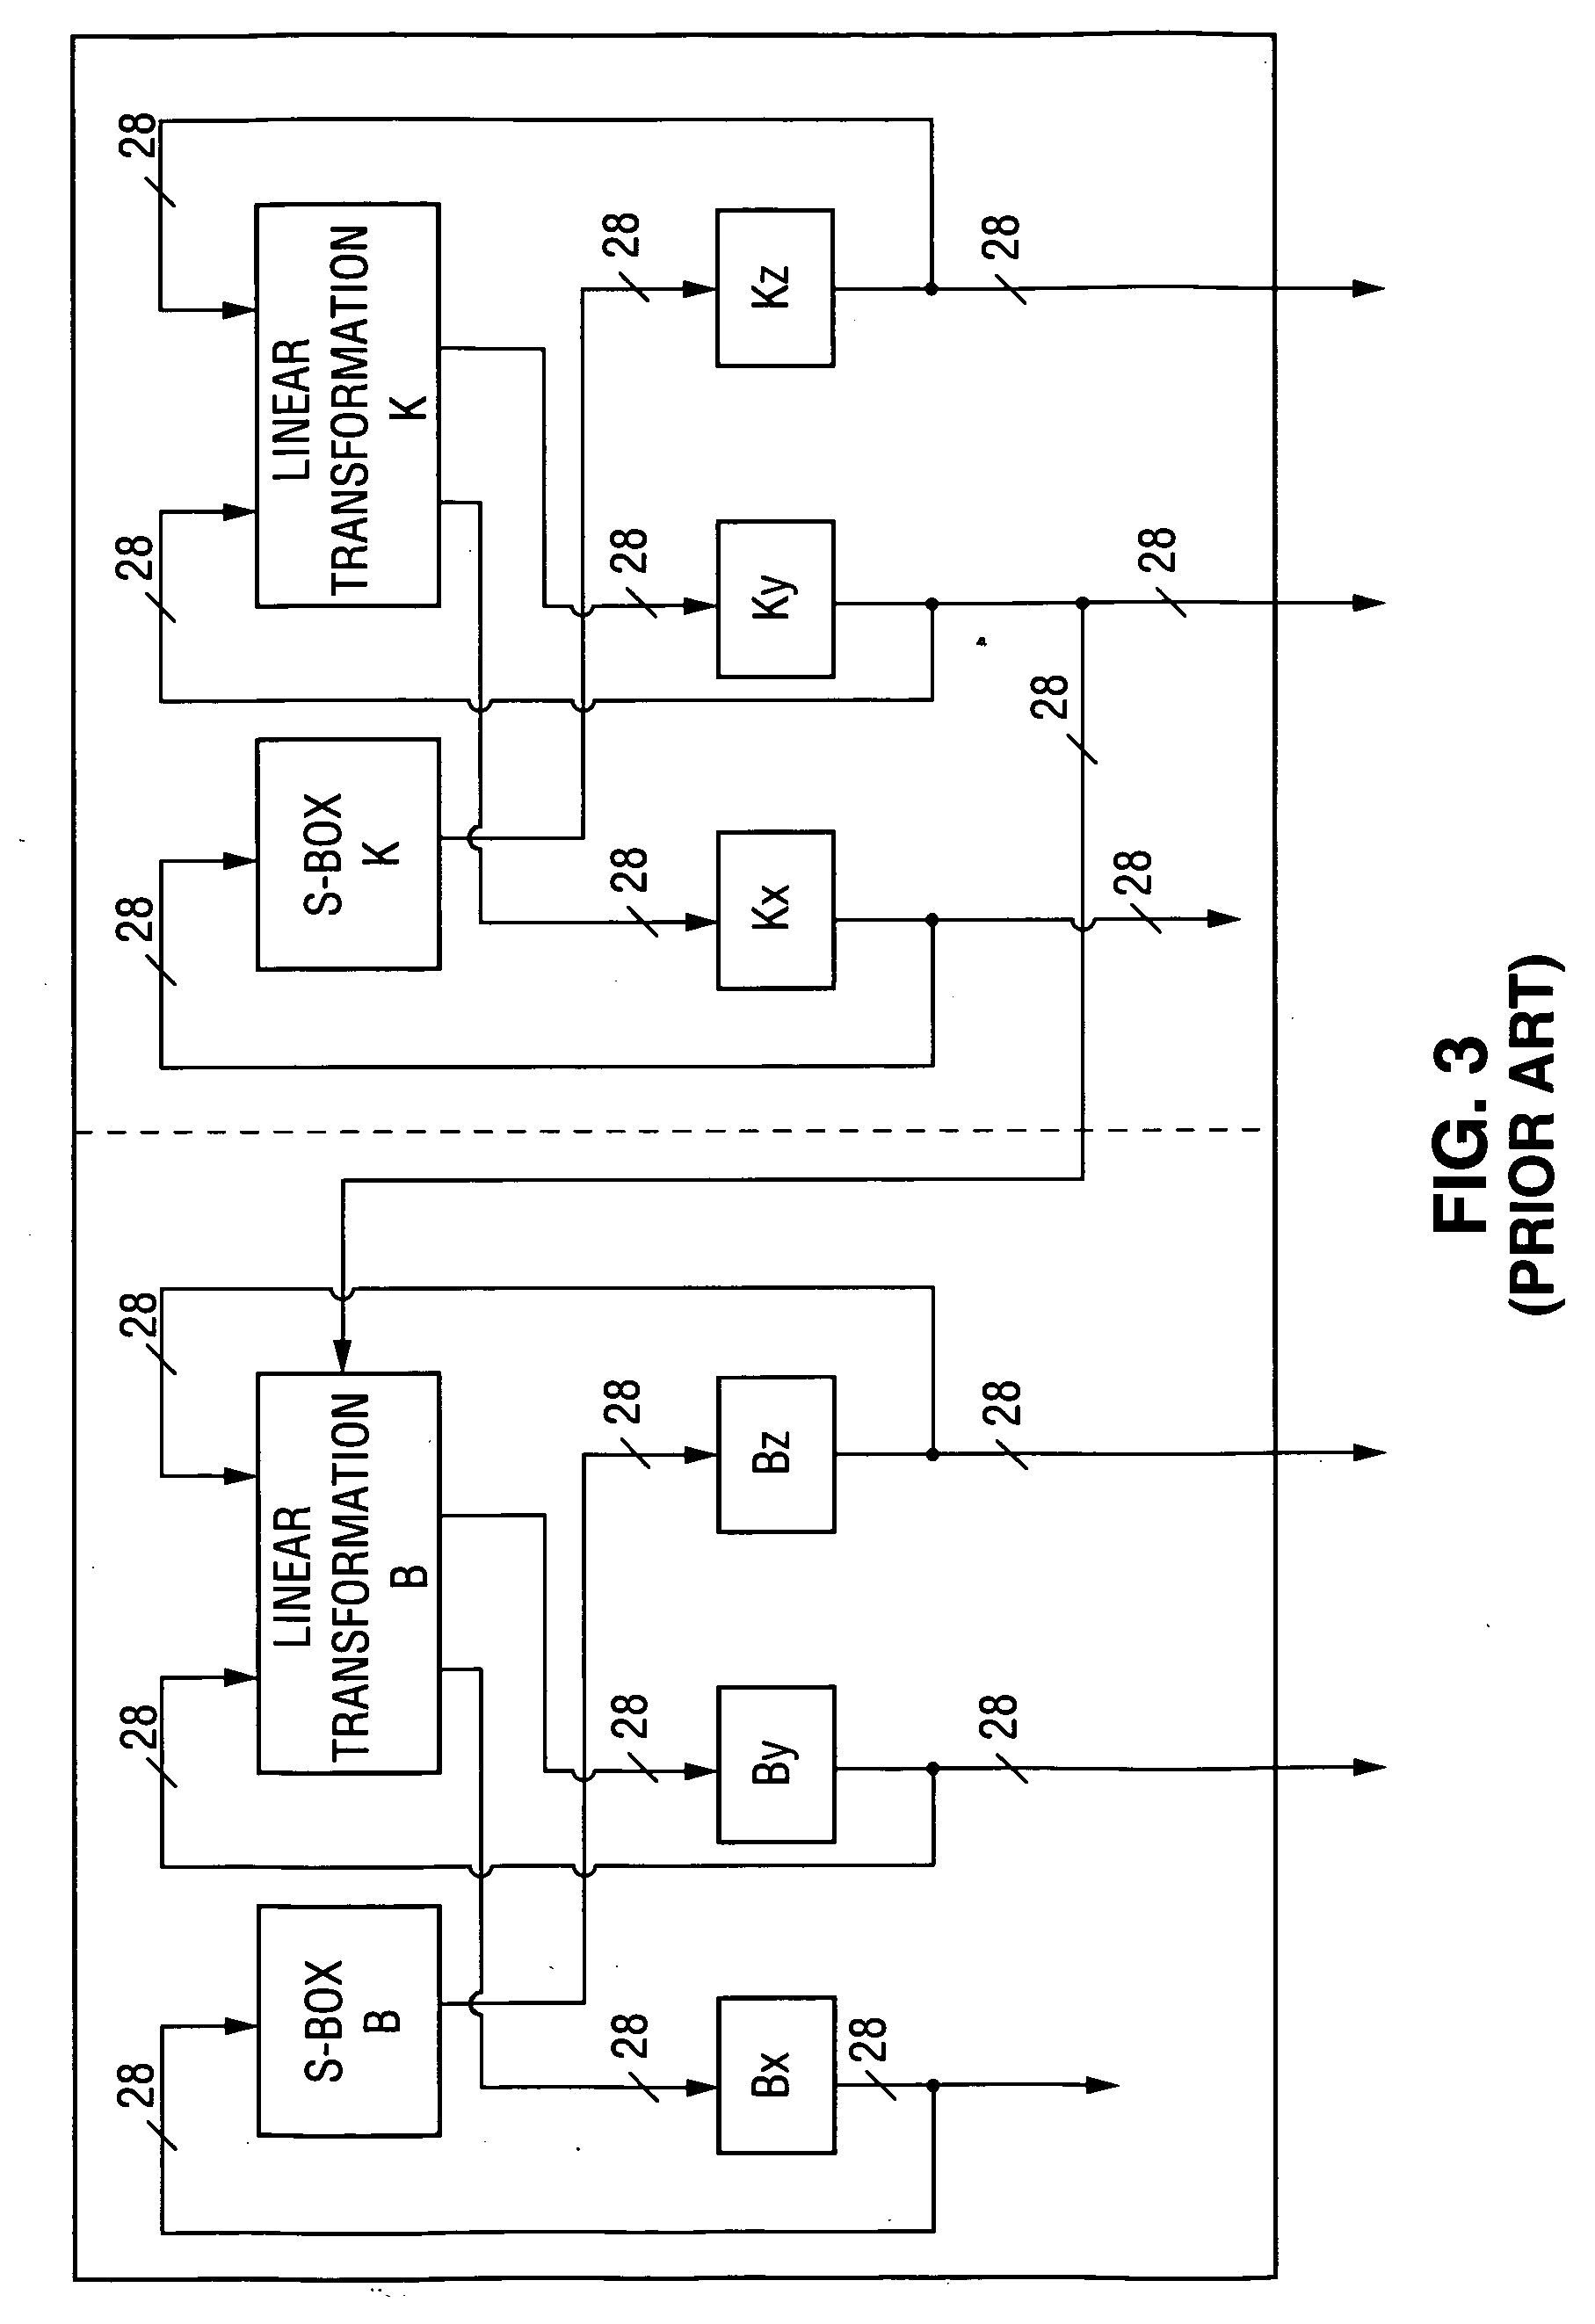 Method and apparatus for content protection in a personal digital network environment